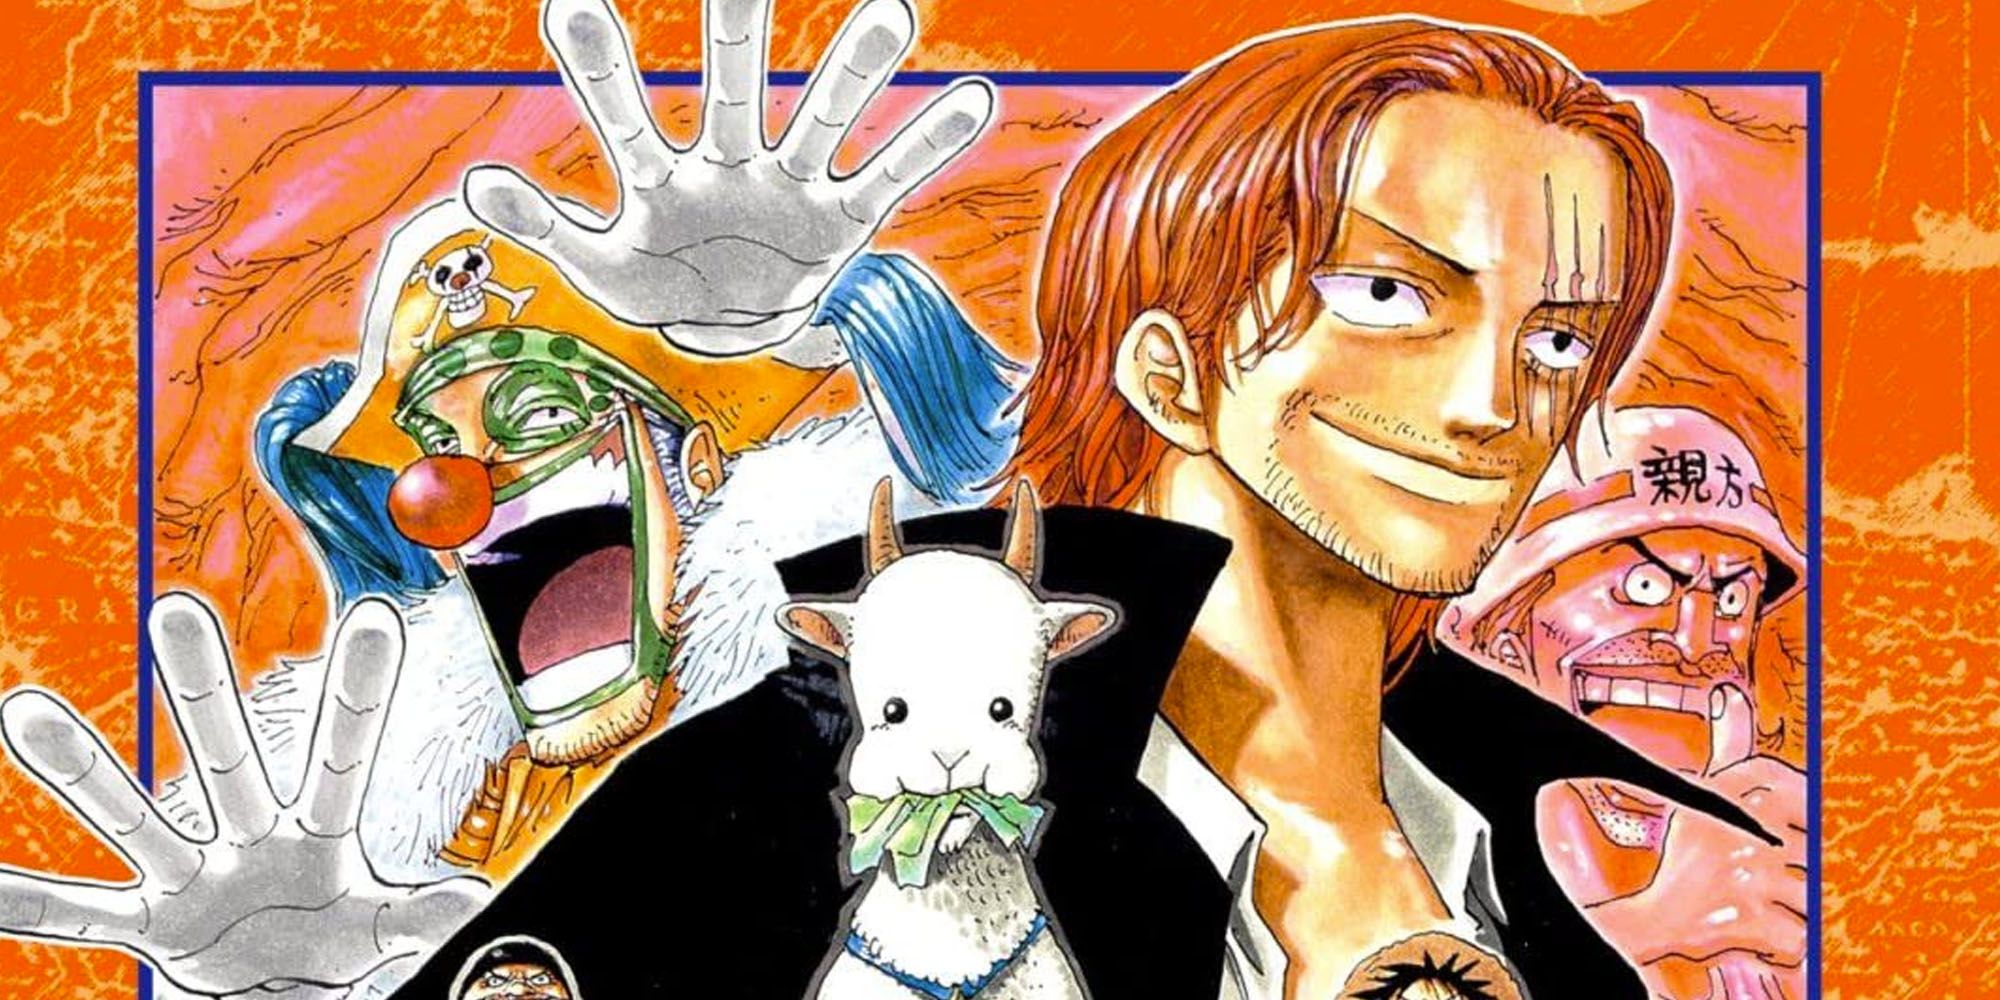 Shanks and Buggy One Piece image from official Viz Website